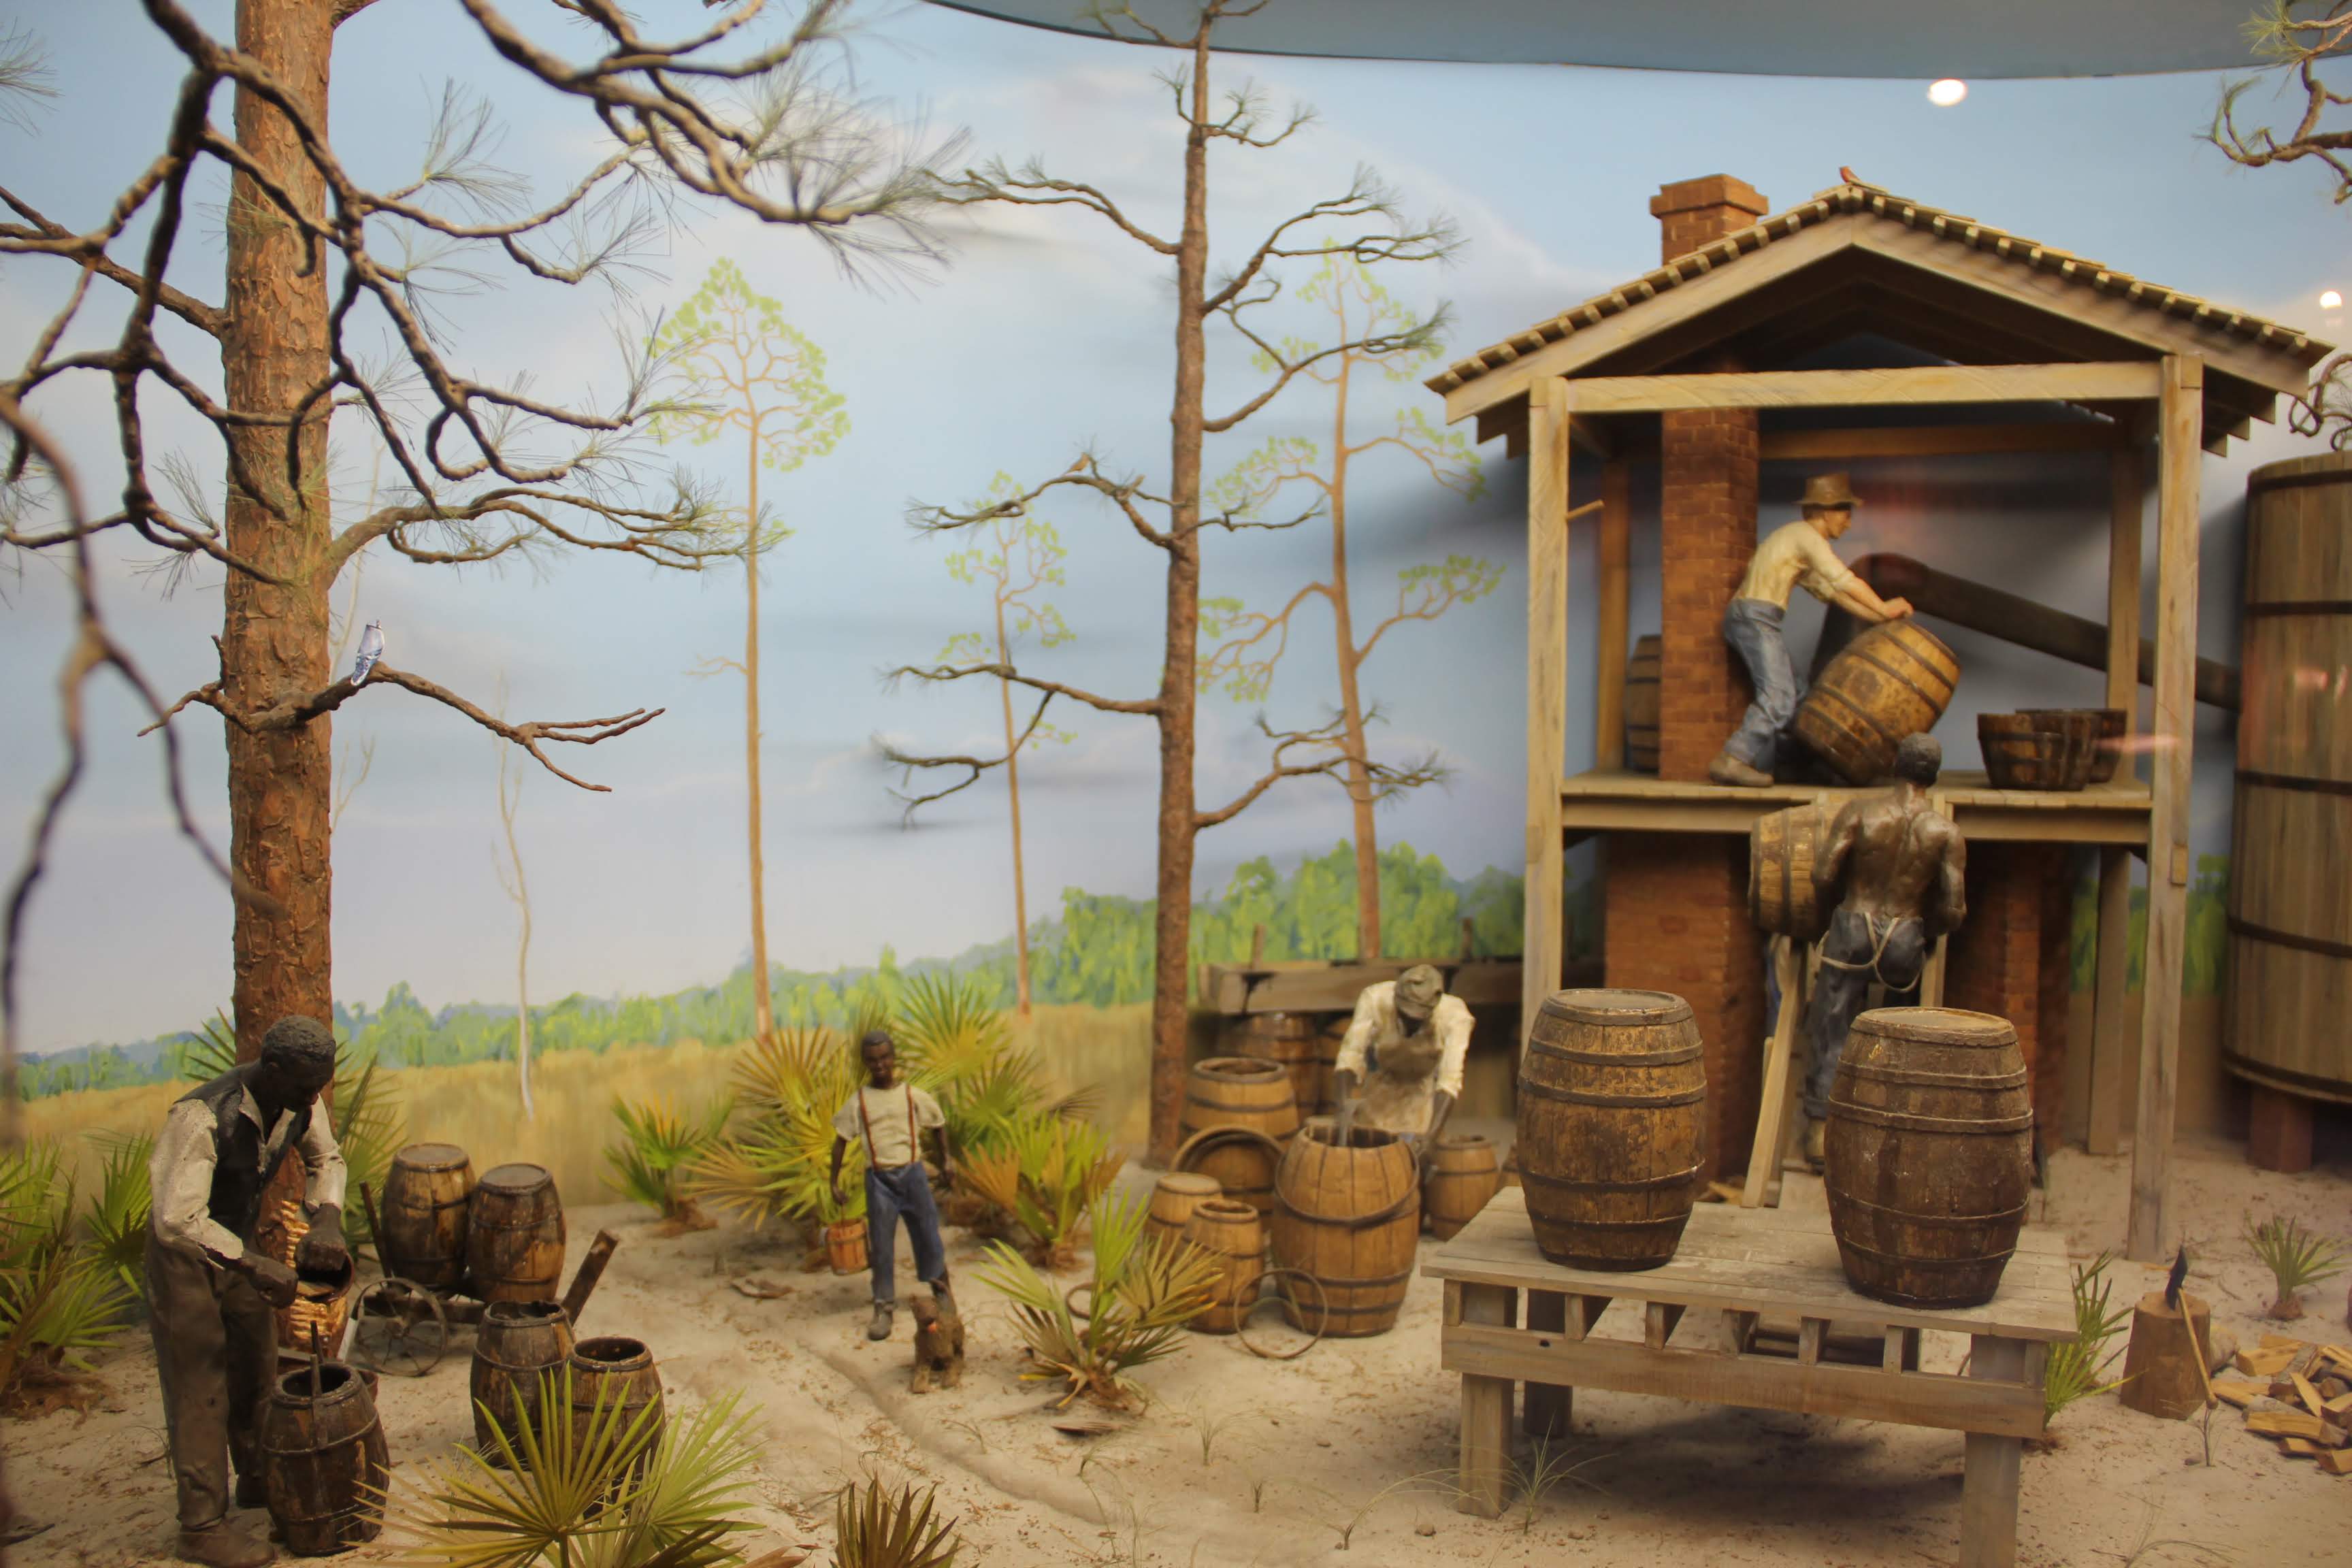 a diorama of people working a turpentine still in Florida in the 1800's.